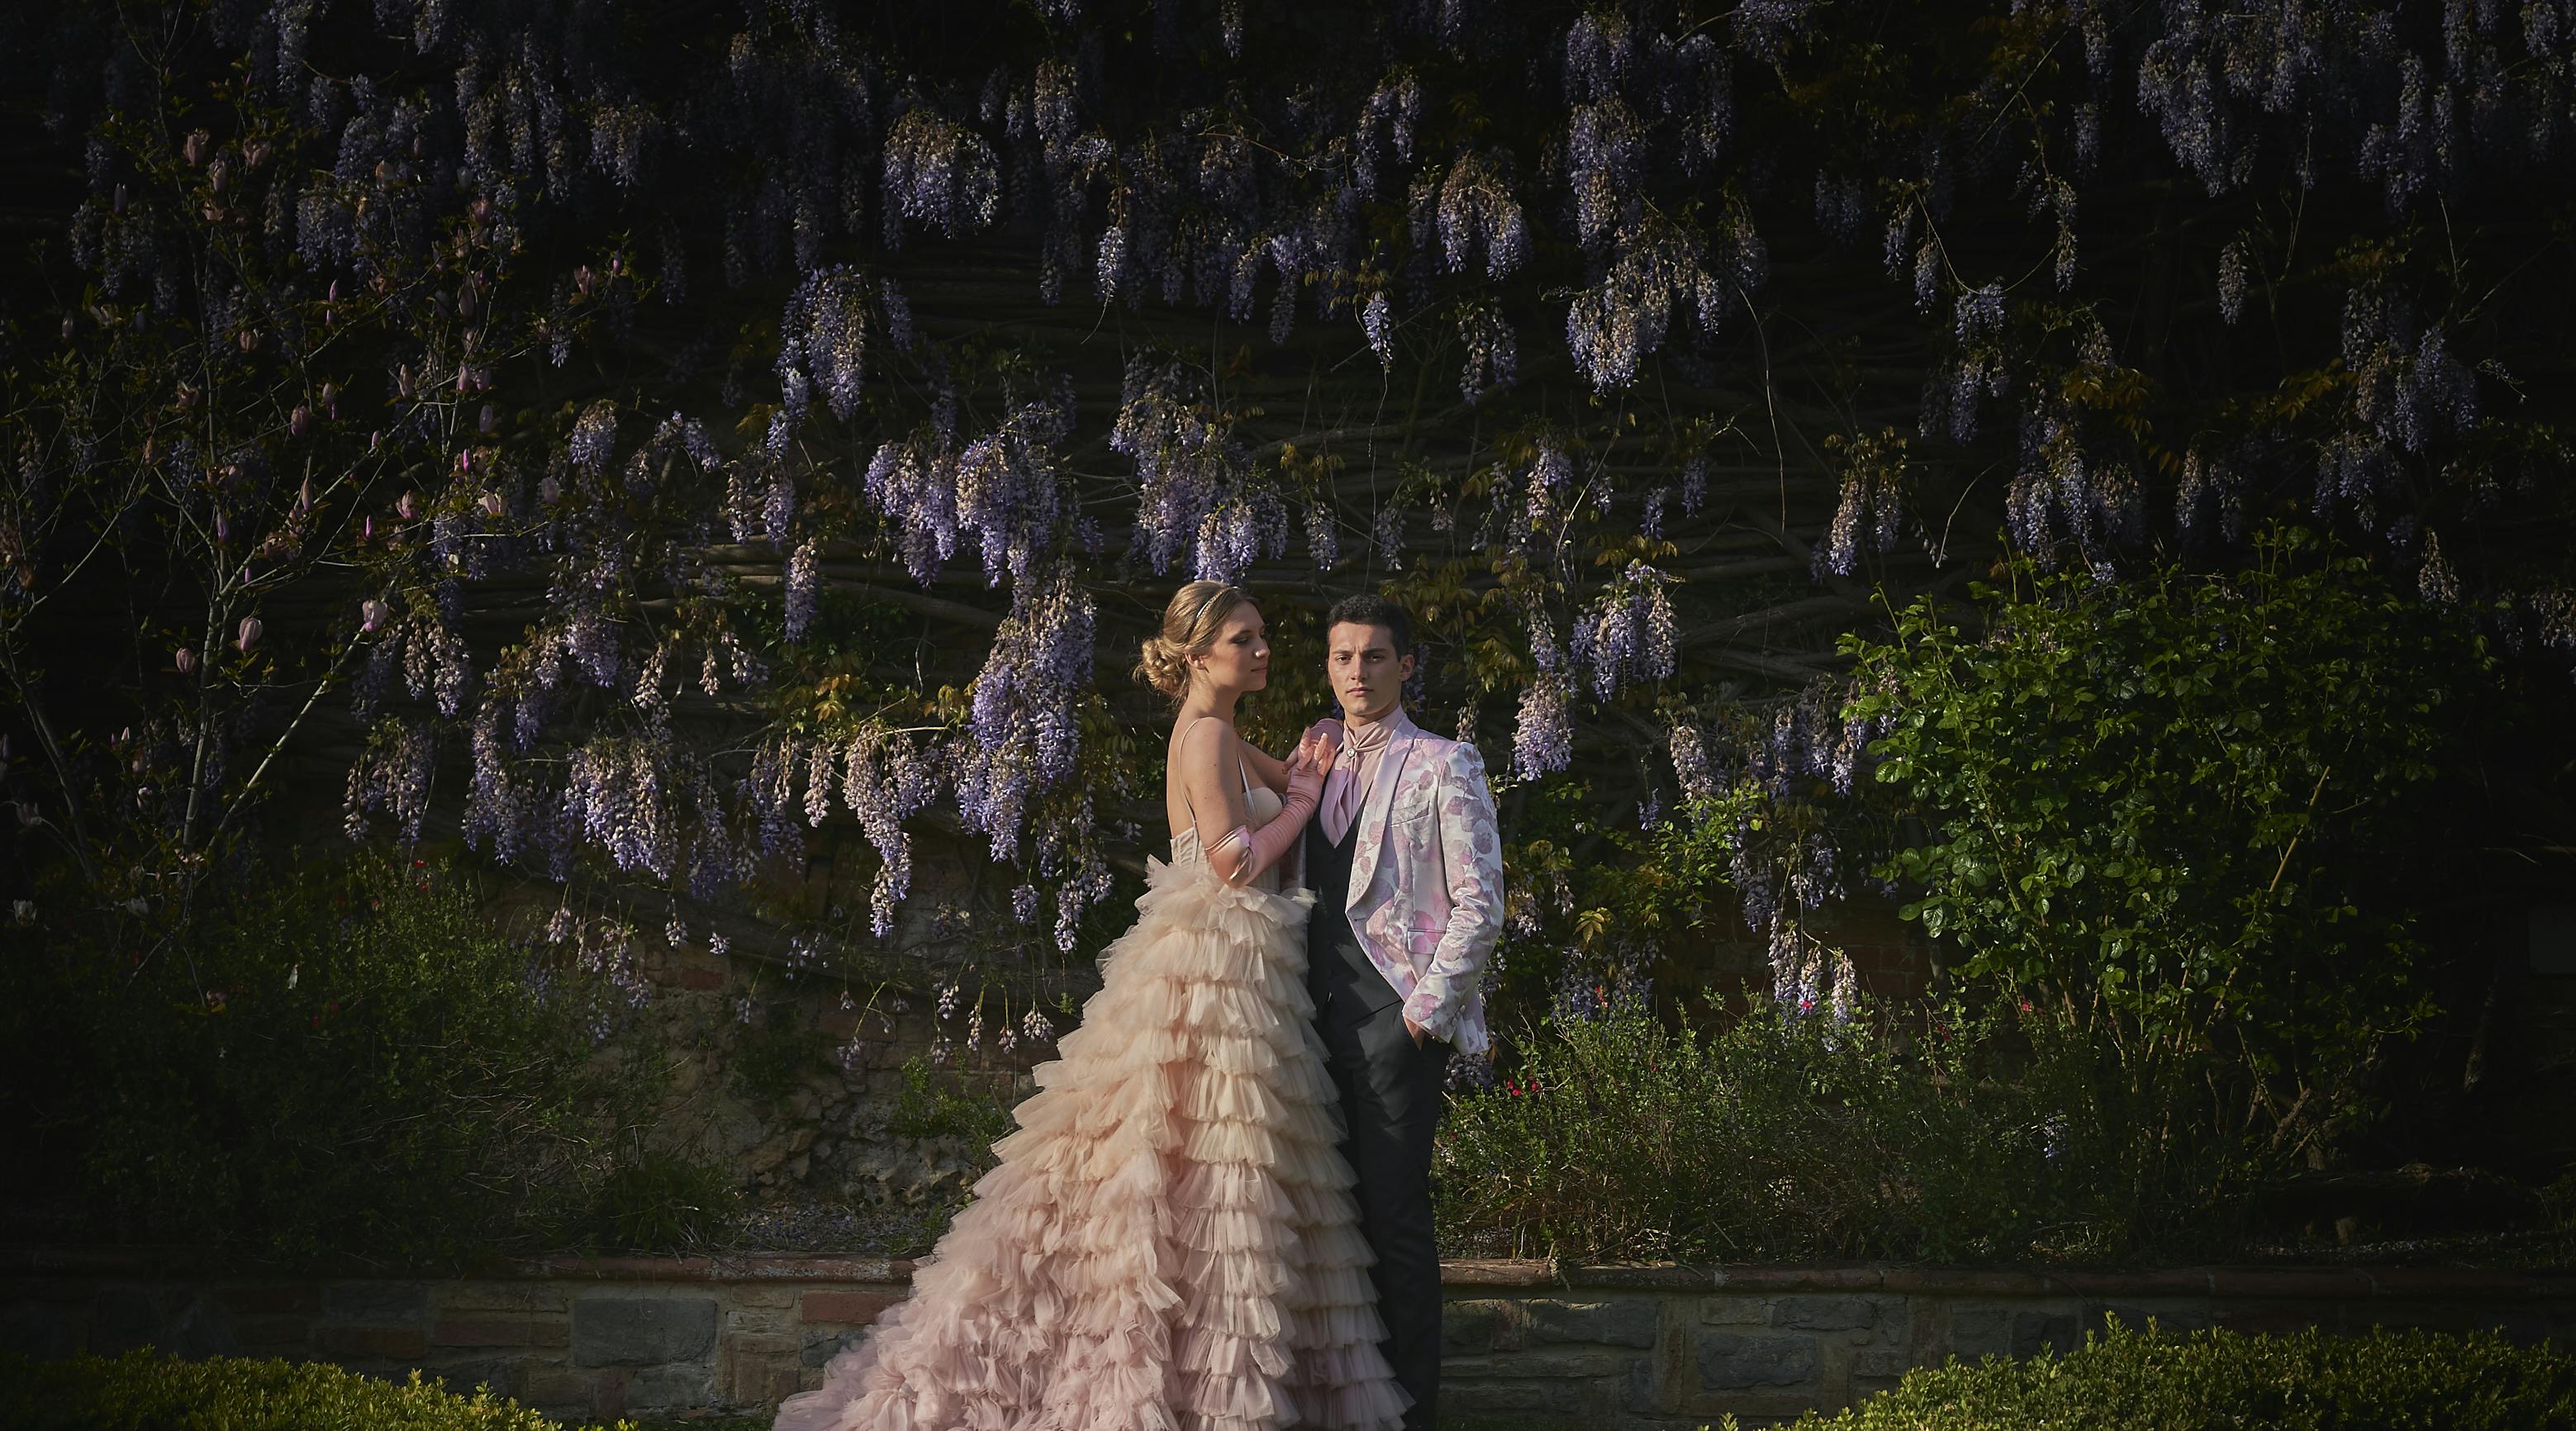 bride and groom dressed in fashion wedding dresses in front of a wall of wisteria plantsll of